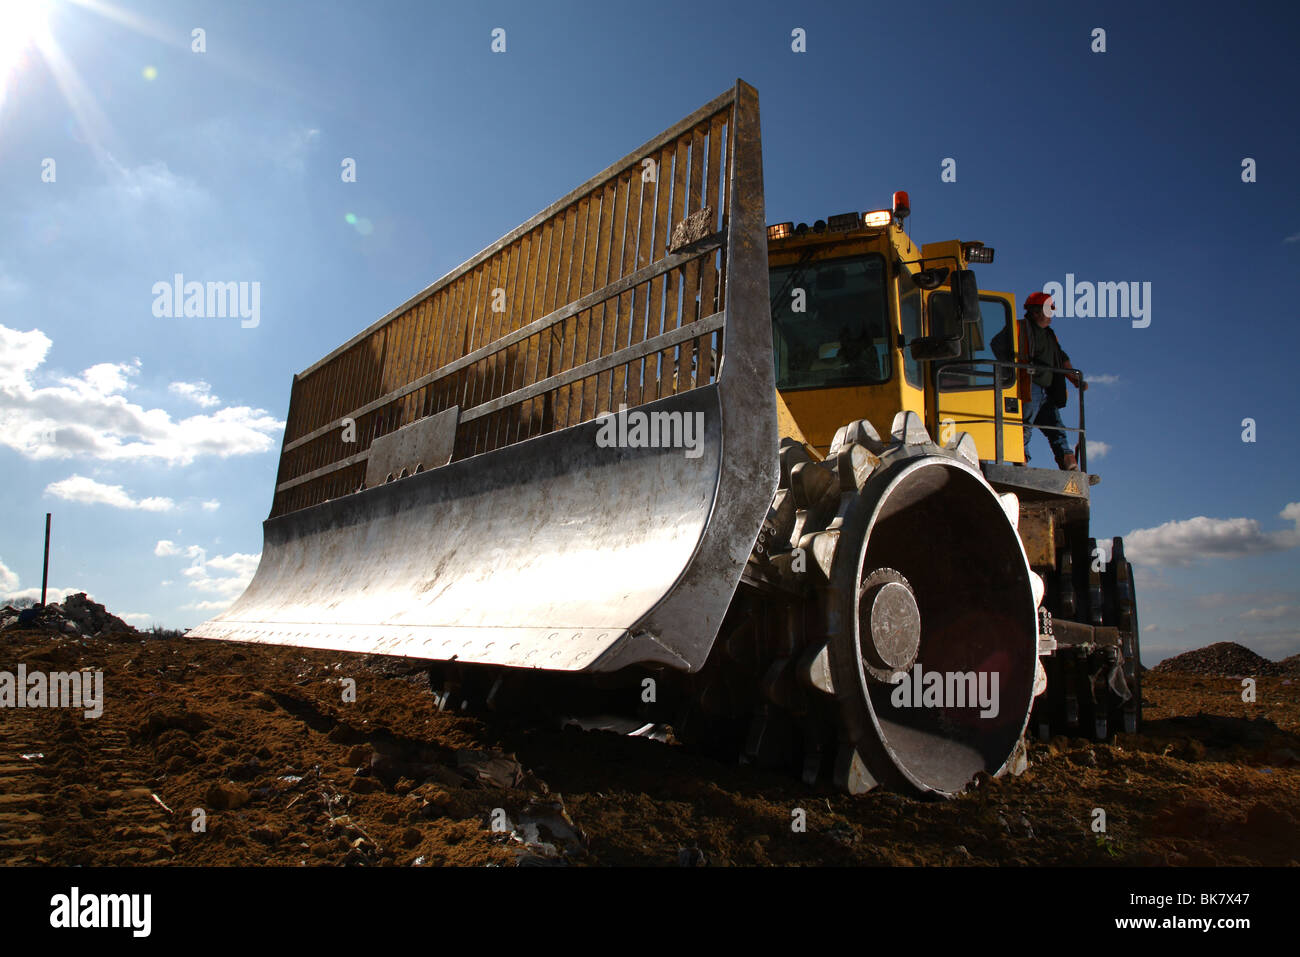 Earth mover on landfill site Stock Photo